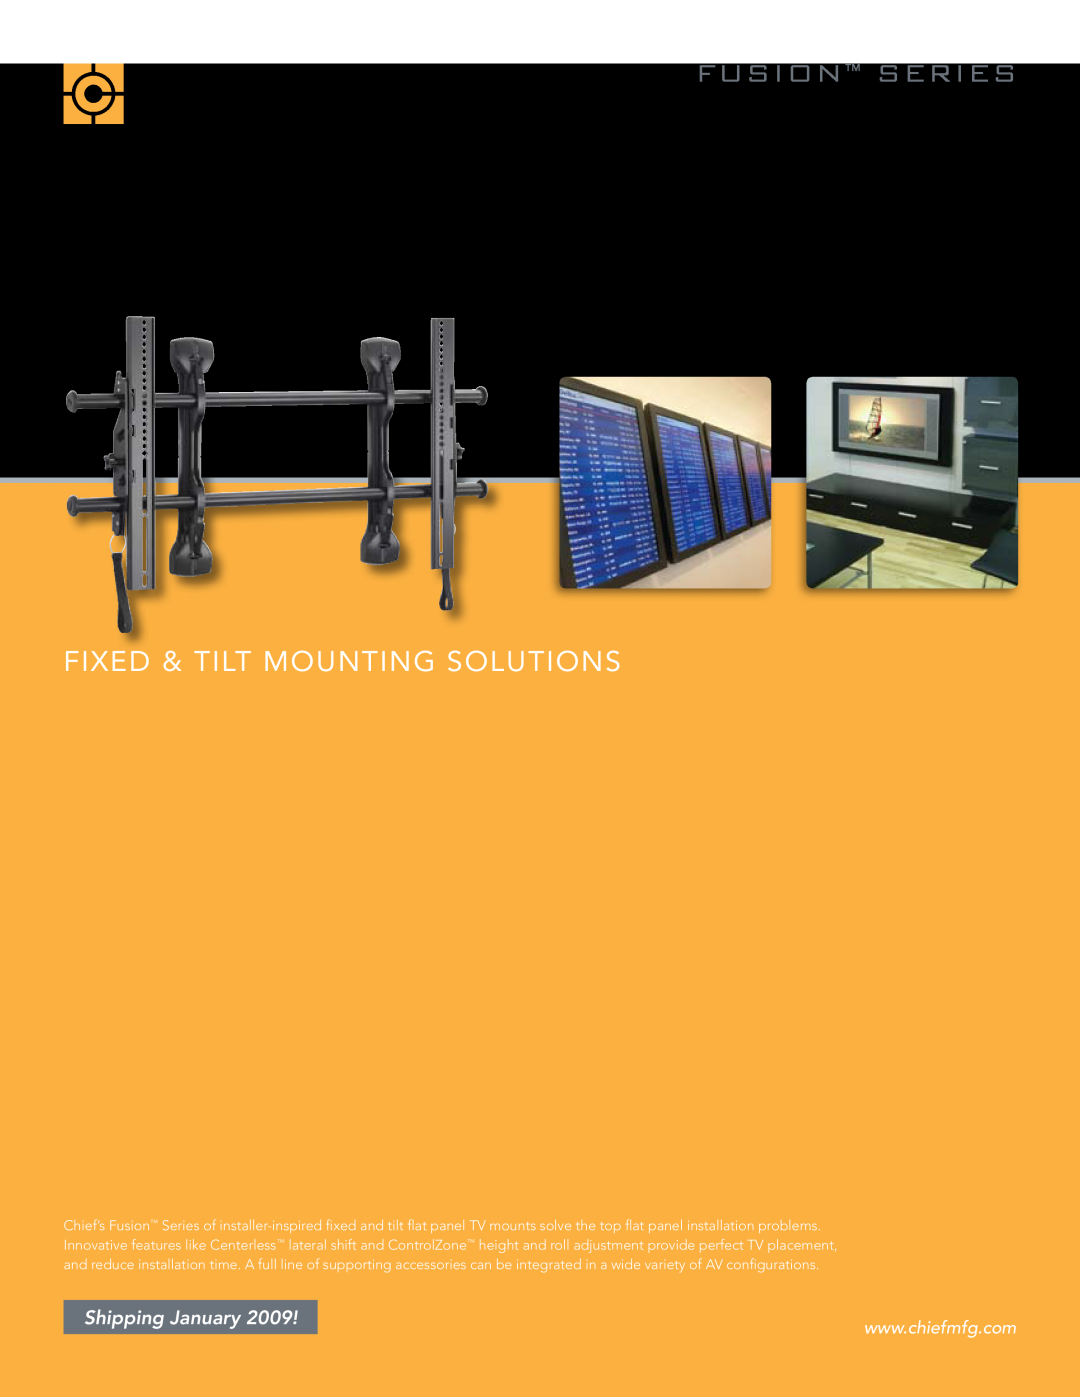 Chief Manufacturing Fusion Series manual fixed & tilt MOUNTING SOLUTIONS, Shipping January 